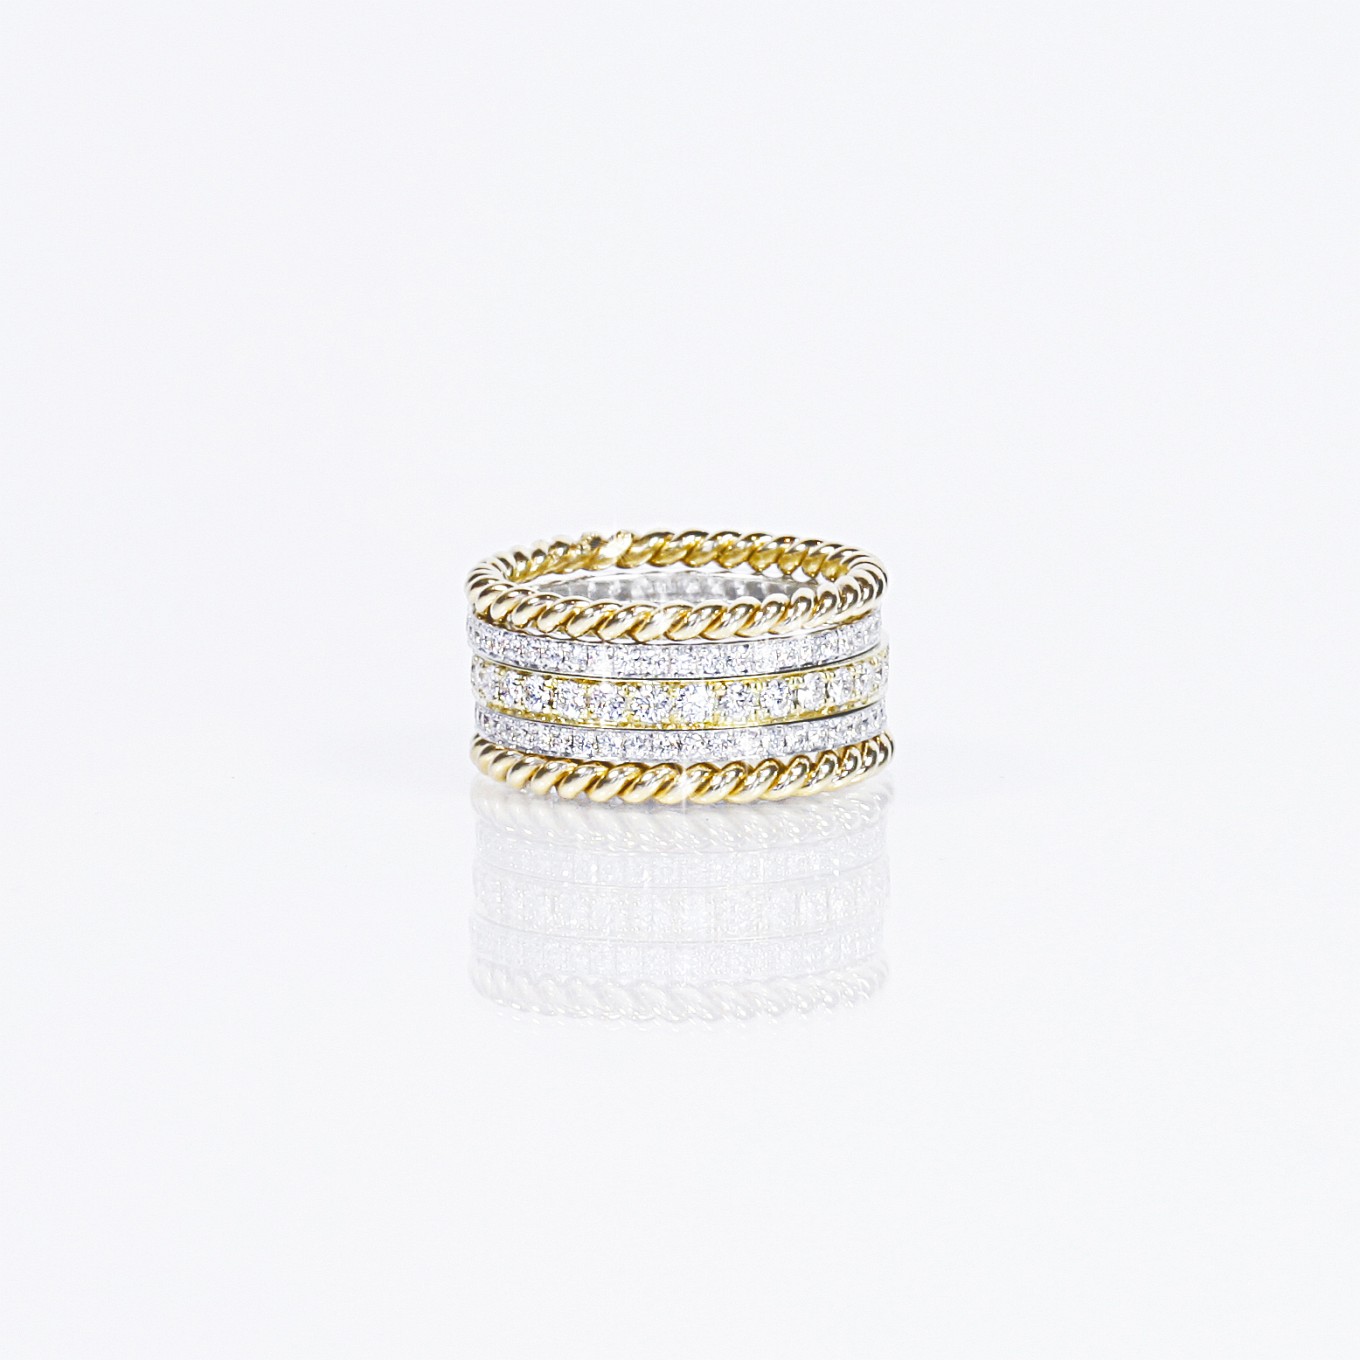 DIAMOND ETERNITY BANDS WITH GOLD BRAIDED BANDS